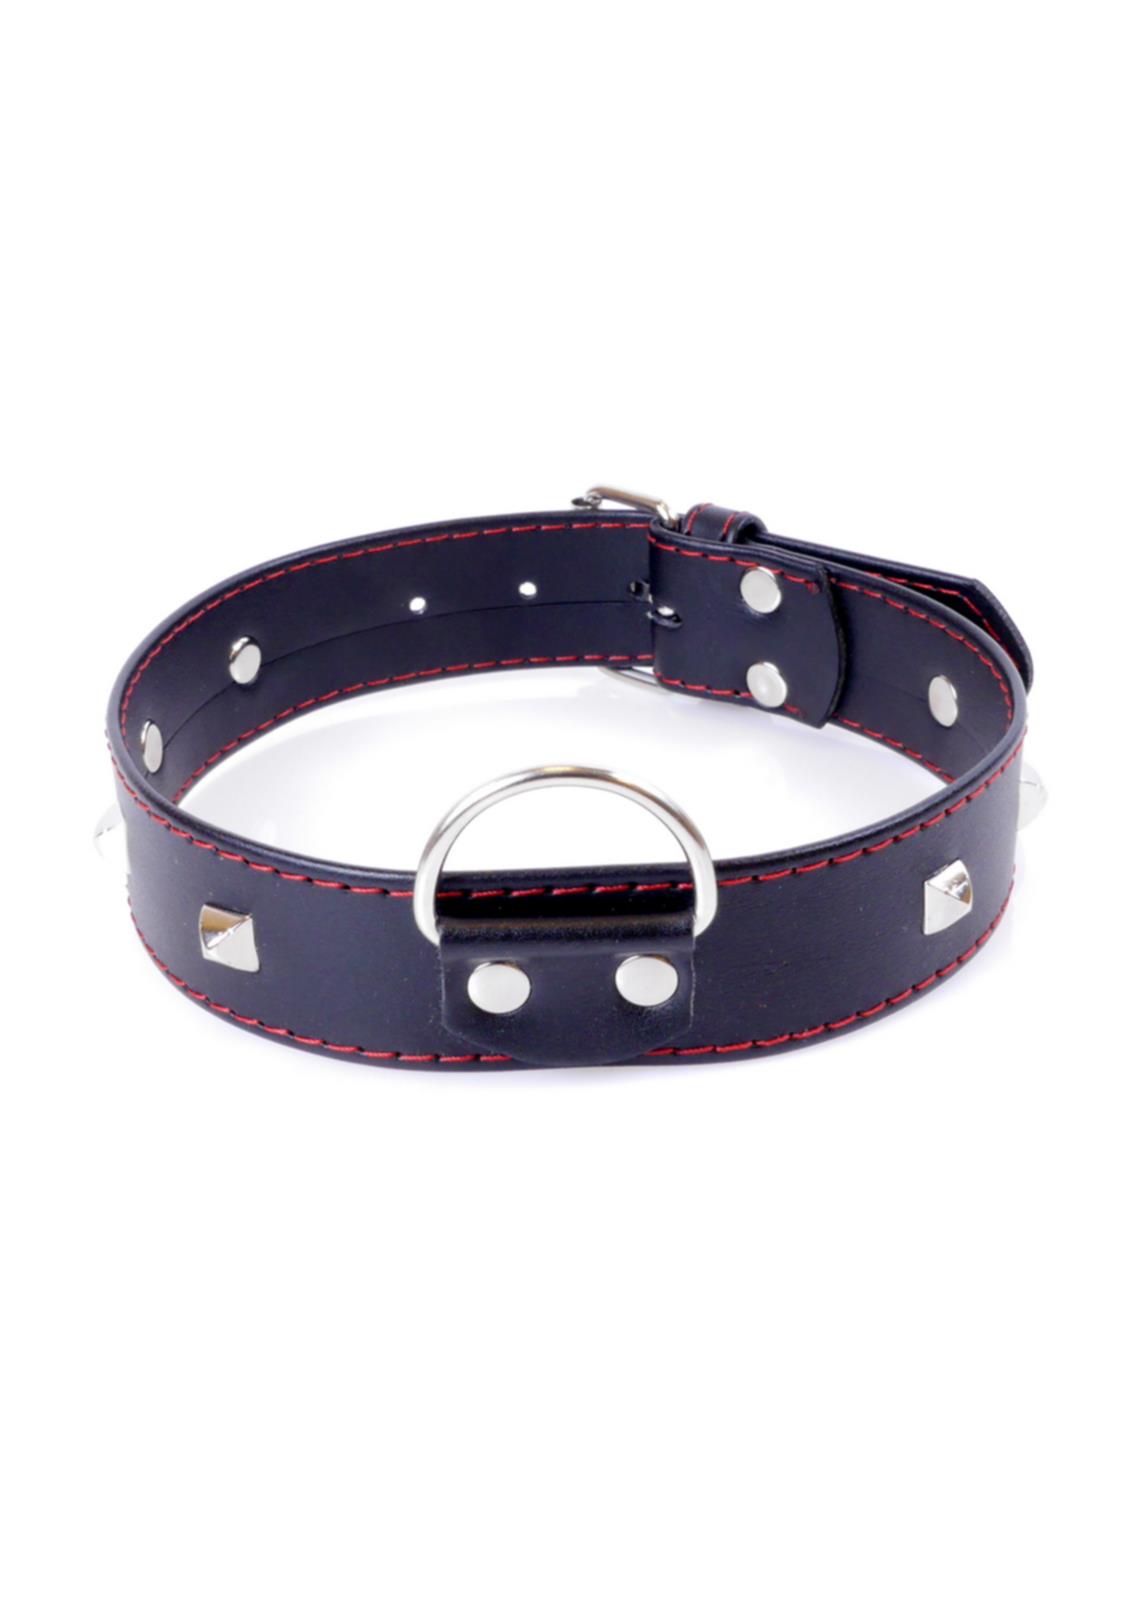 Bossoftoys - 33-00113 - Fetish Boss Series Collar with studs - 3 cm - Red